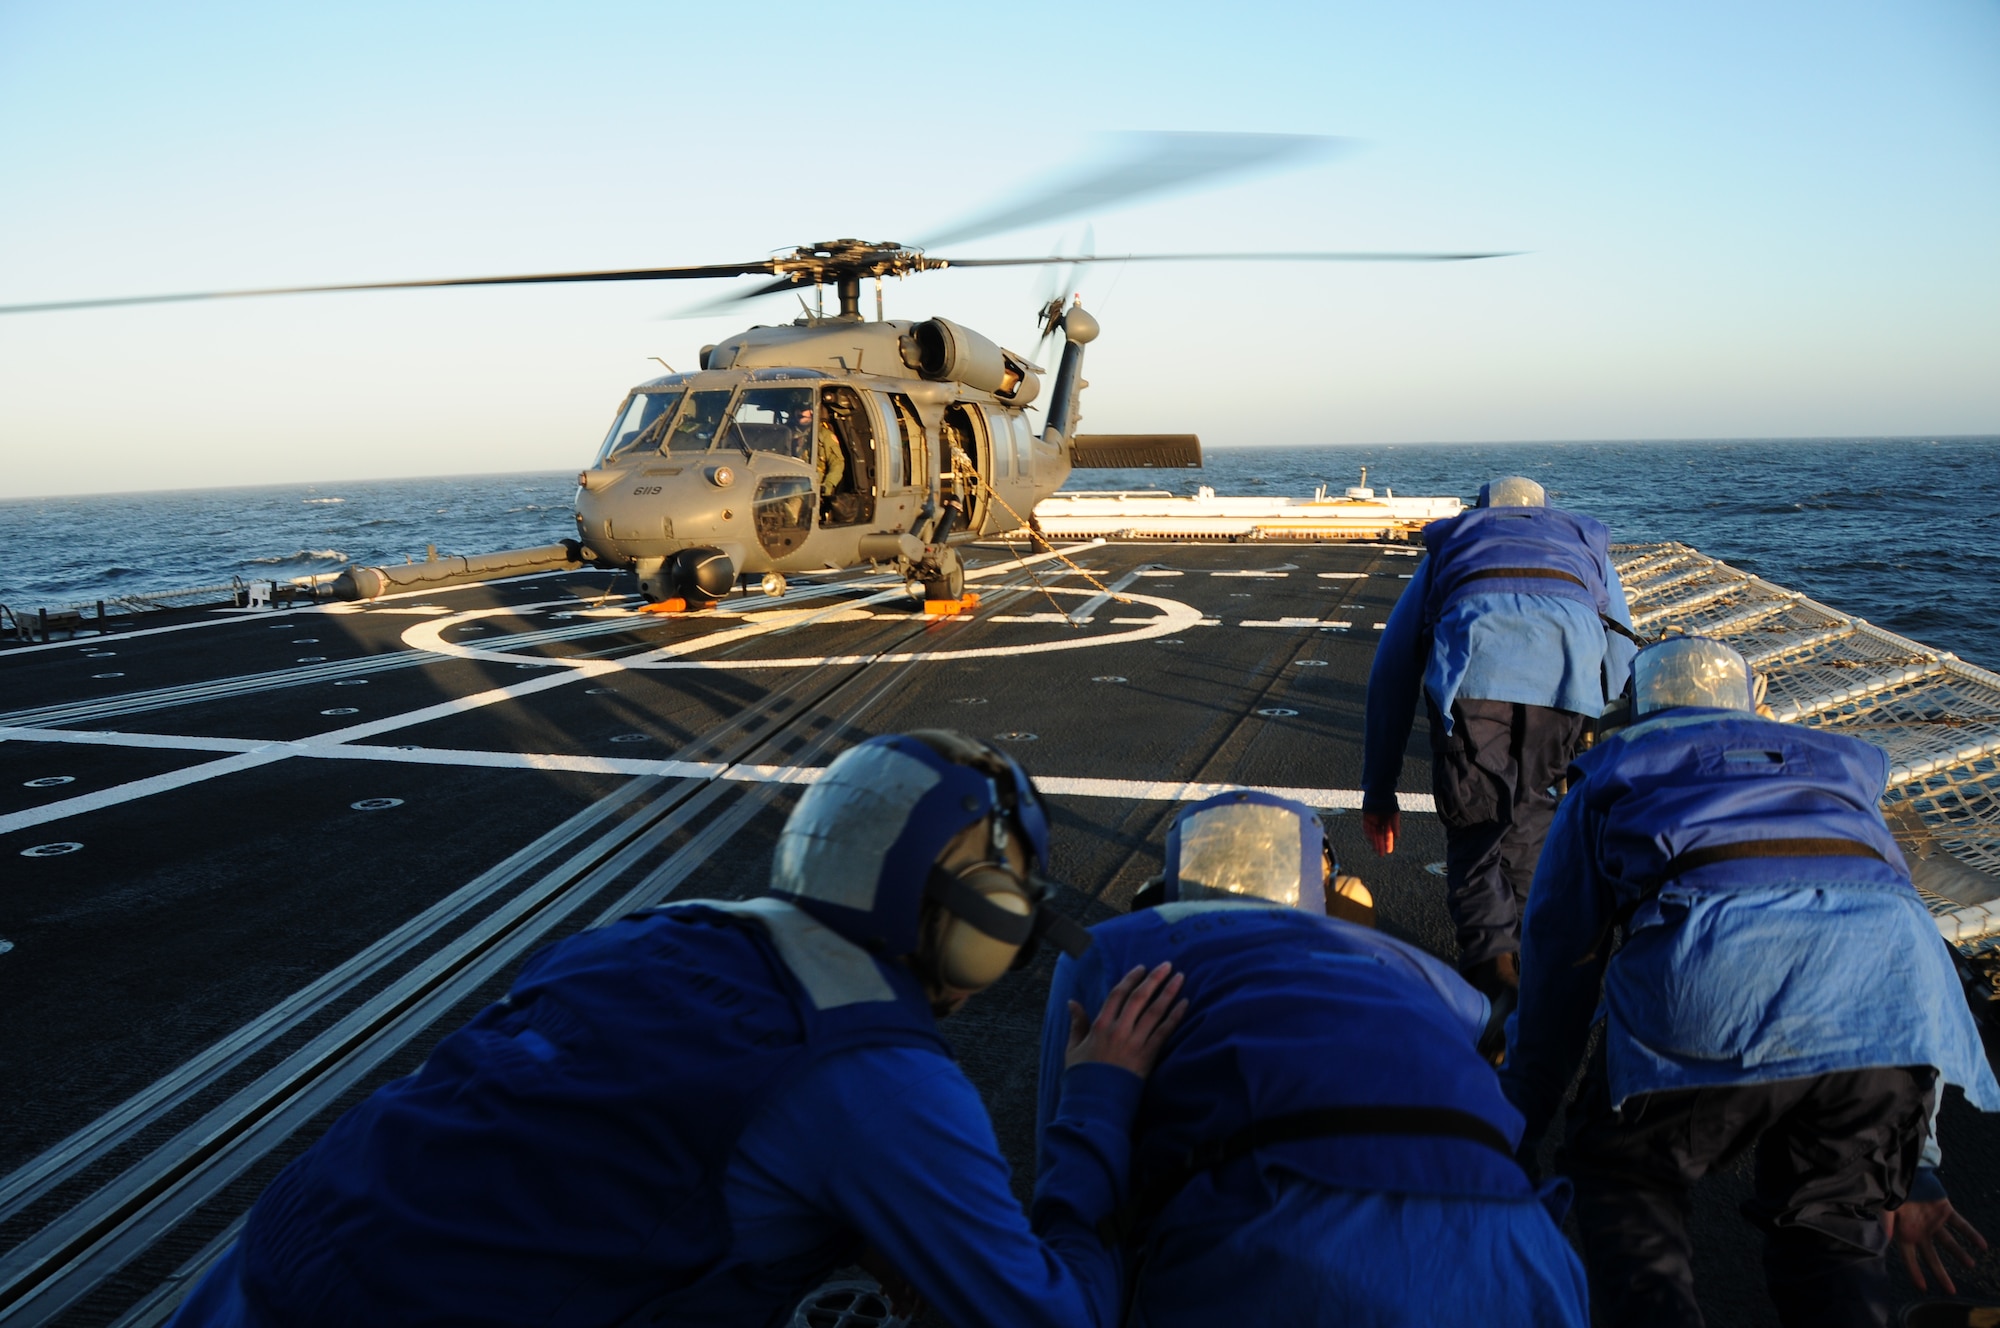 California Air National Guard members assigned to the 129th Rescue Squadron conduct aircraft deck landing qualifications with the United States Coast Guard, approximately 25 nautical miles off the coast of Northern California, June 20, 2012. This is the first landing of an Air Force HH-60G Pave Hawk on the National Security Coast Guard Cutter, USCG Bertholf. (Air National Guard photo by Staff Sgt. Kim E. Ramirez/released)